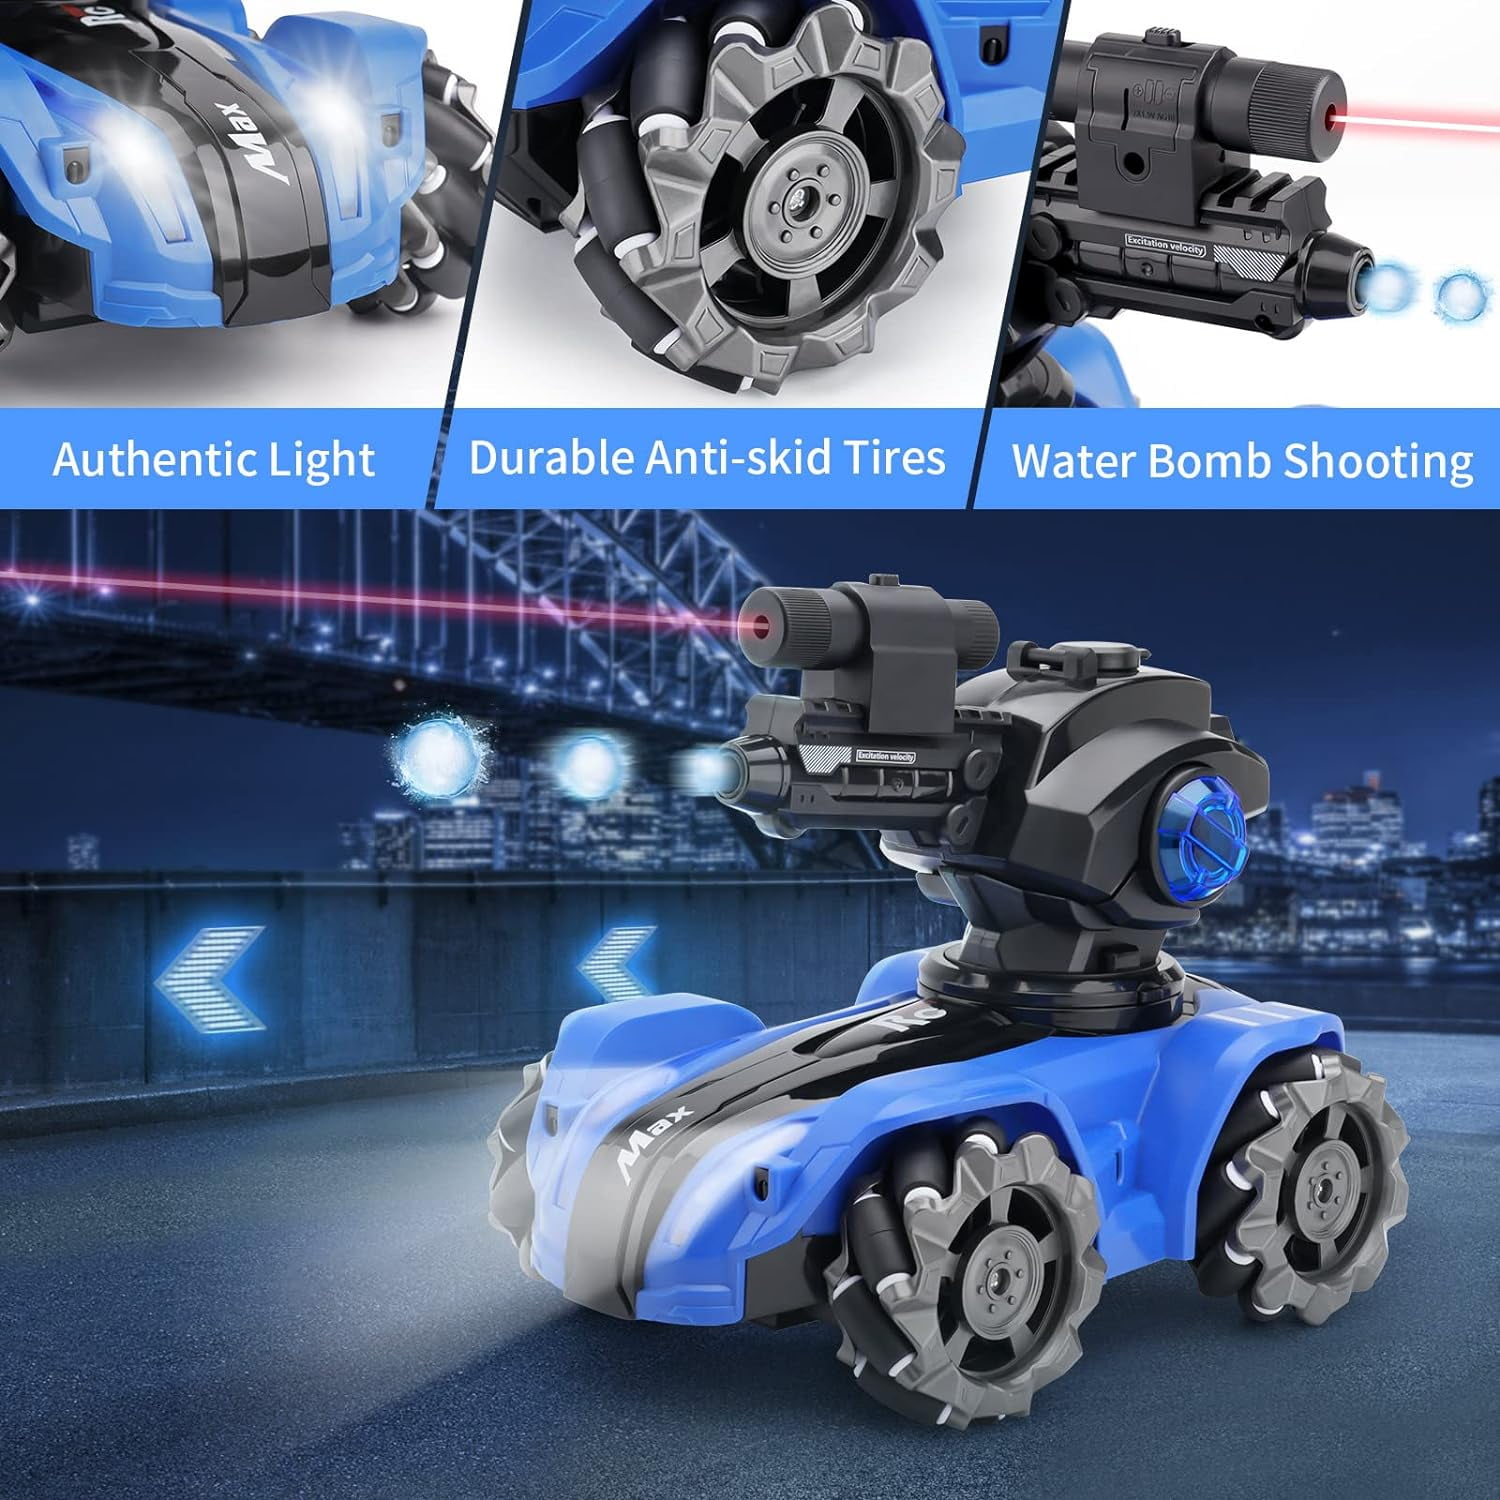  CXJ 3 Head RC Car,Rc Tank Car Shooting Water Bullets Remote  Control Car, Kids 4WD Battle Stunt Car, Blow Bubble, Shoot Foam Darts, 360°Rotating,  LEDs, Music, Toy Gifts for 6-15 Years